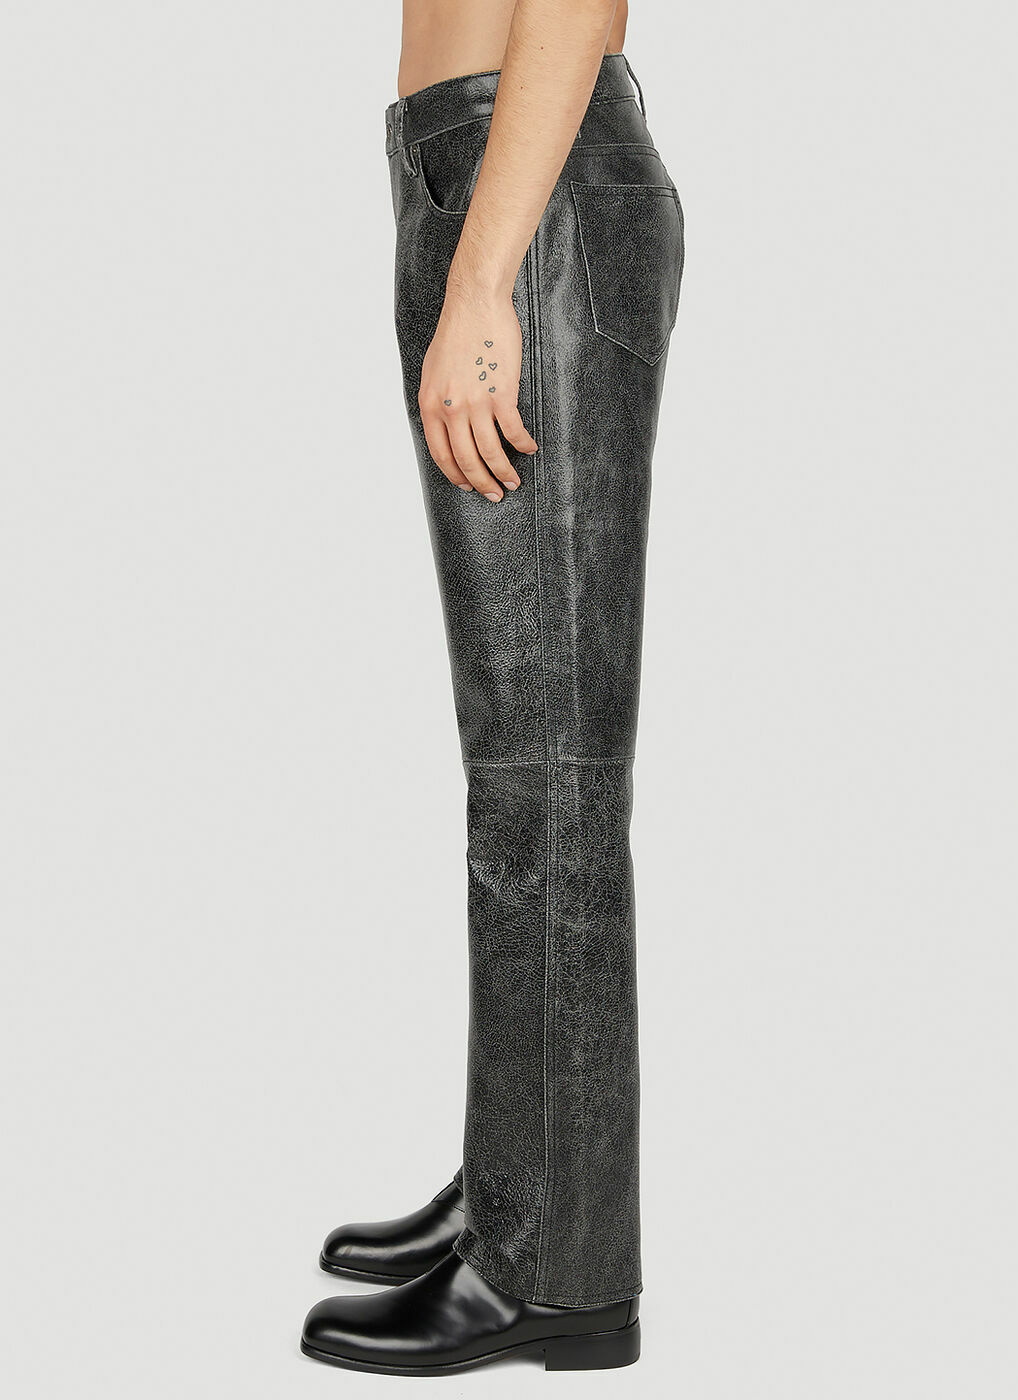 Guess USA Brown Flare Jeans in Black